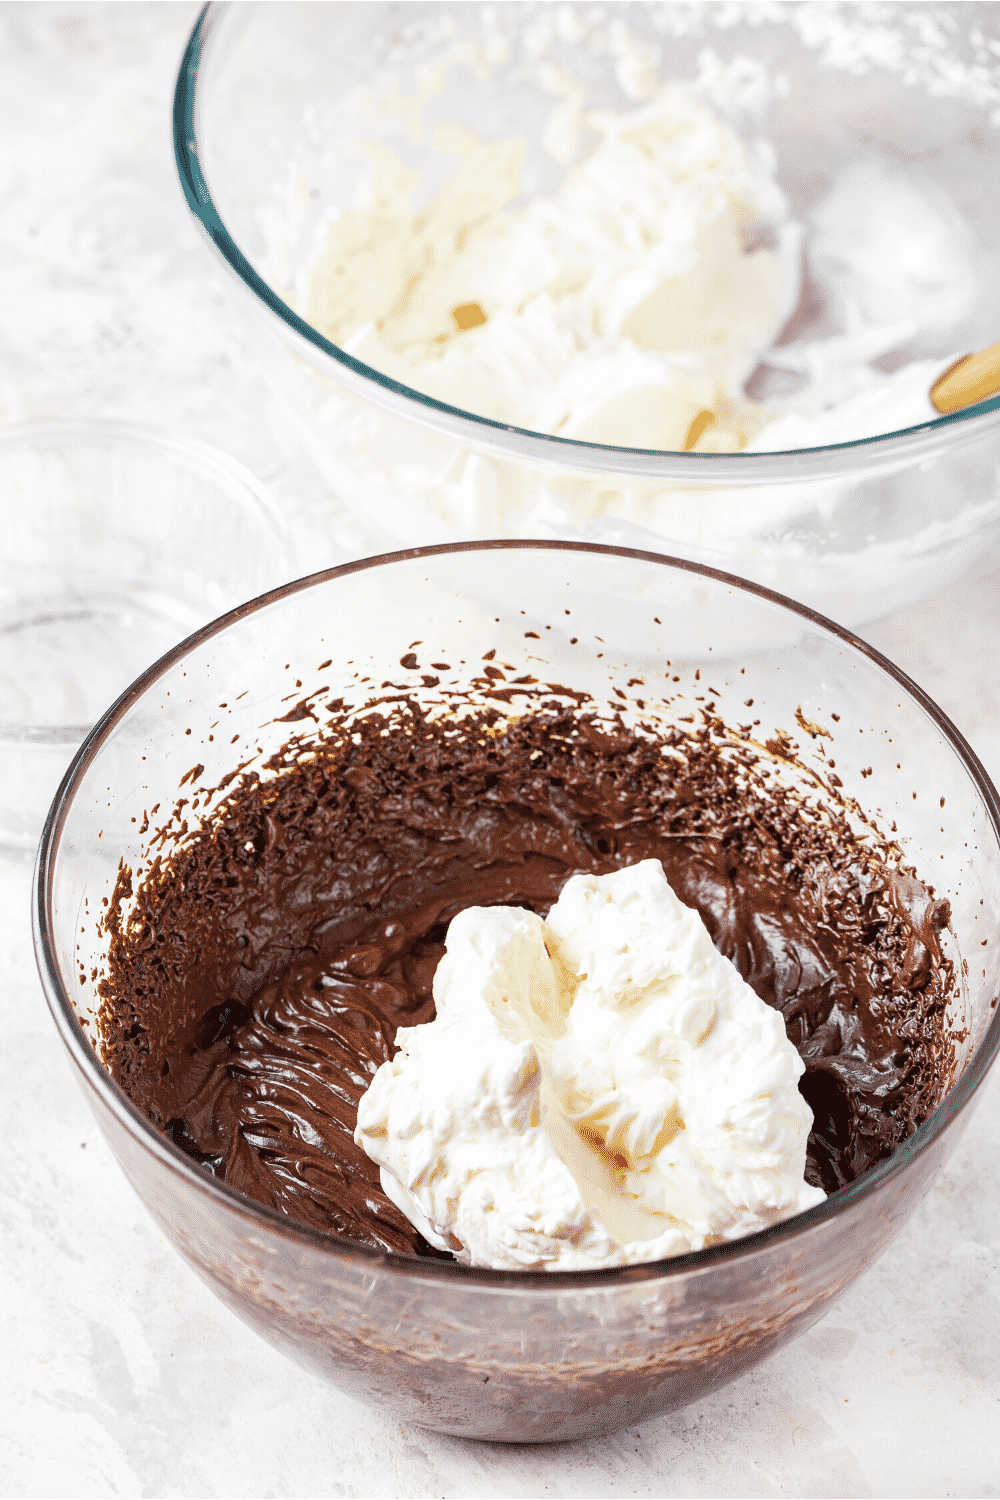 A glass bowl of whipped keto chocolate with some whipped cream on top. There is a glass bowl of whipped cream behind the keto mousse with a rubber spatula in the bowl.